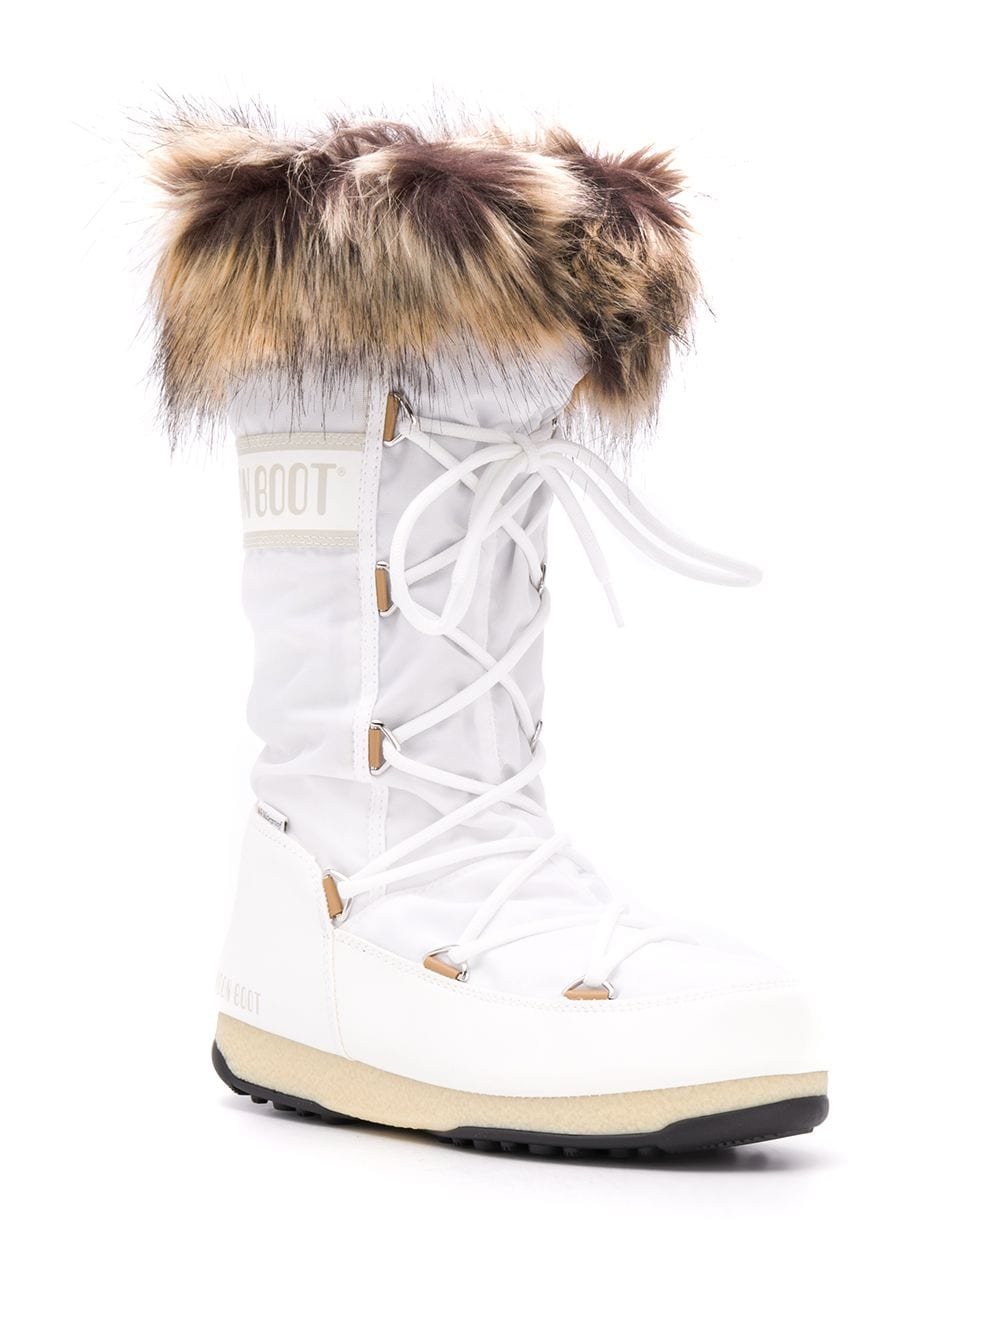 Image 2 of Moon Boot ProTECHt Monaco high-top snow boots